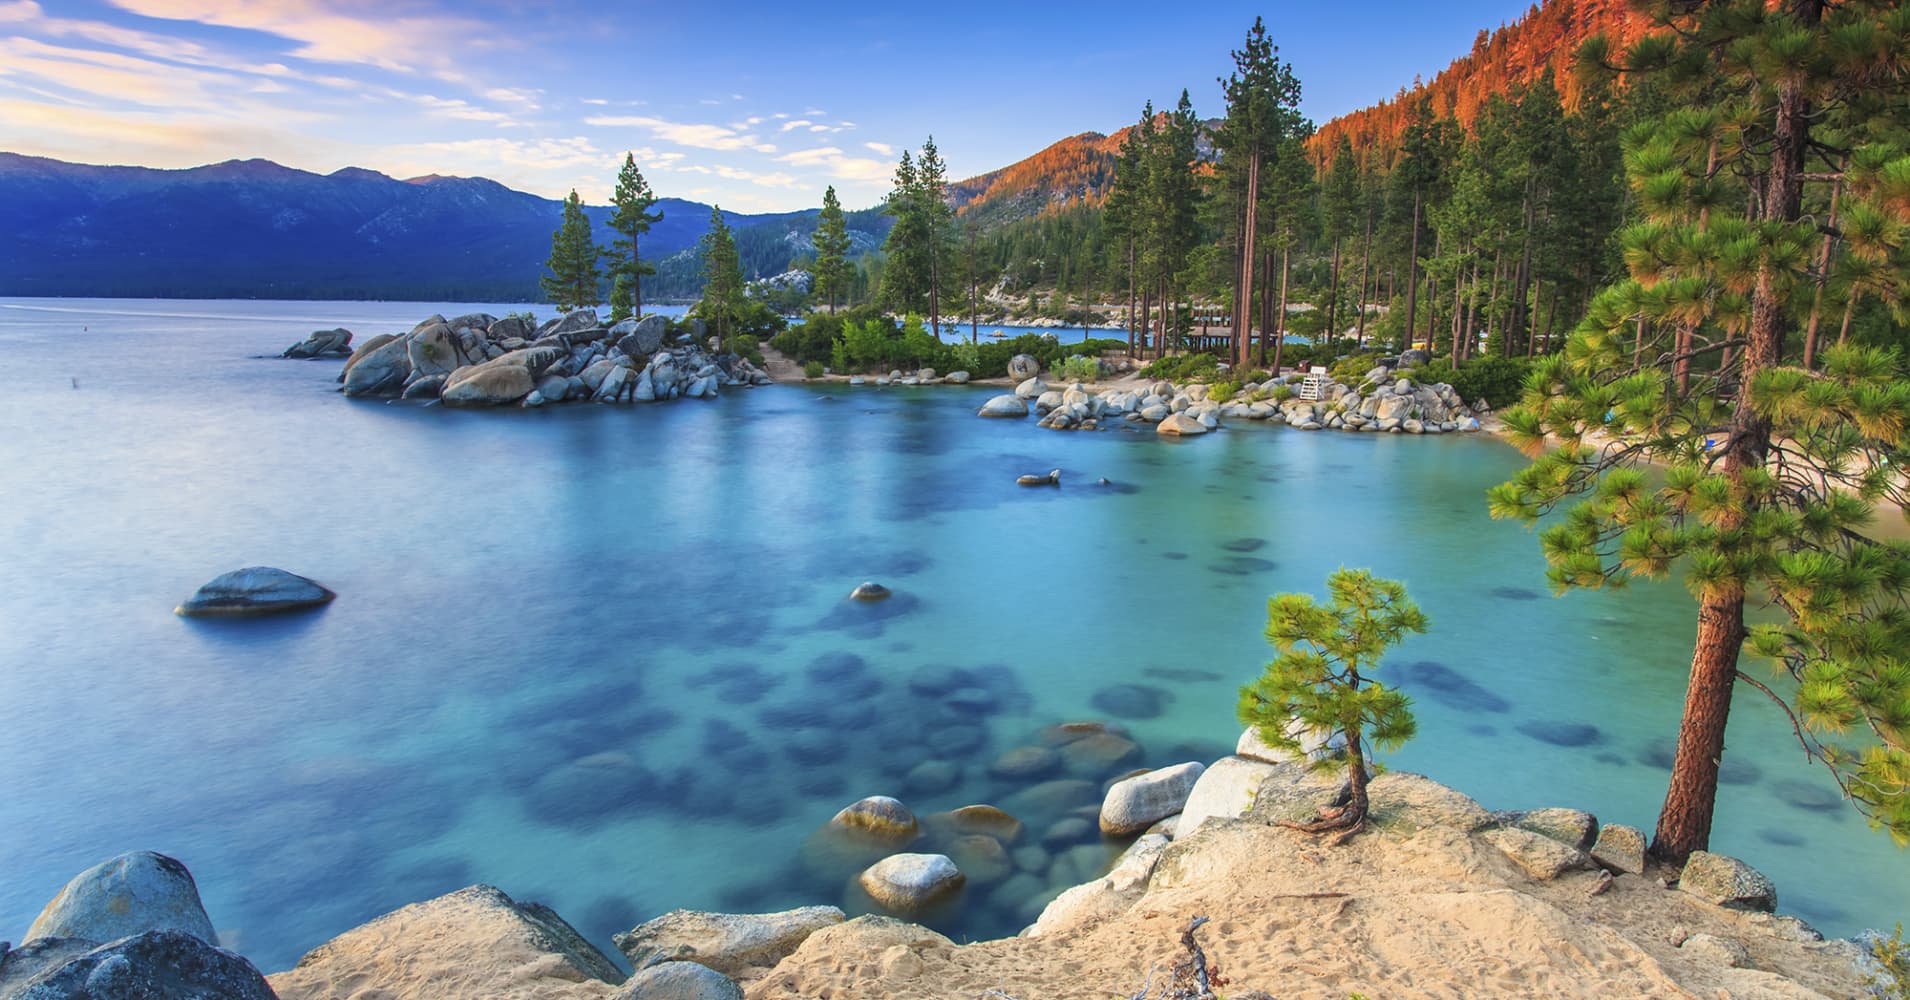 Most expensive house (we could get into): Lake Tahoe